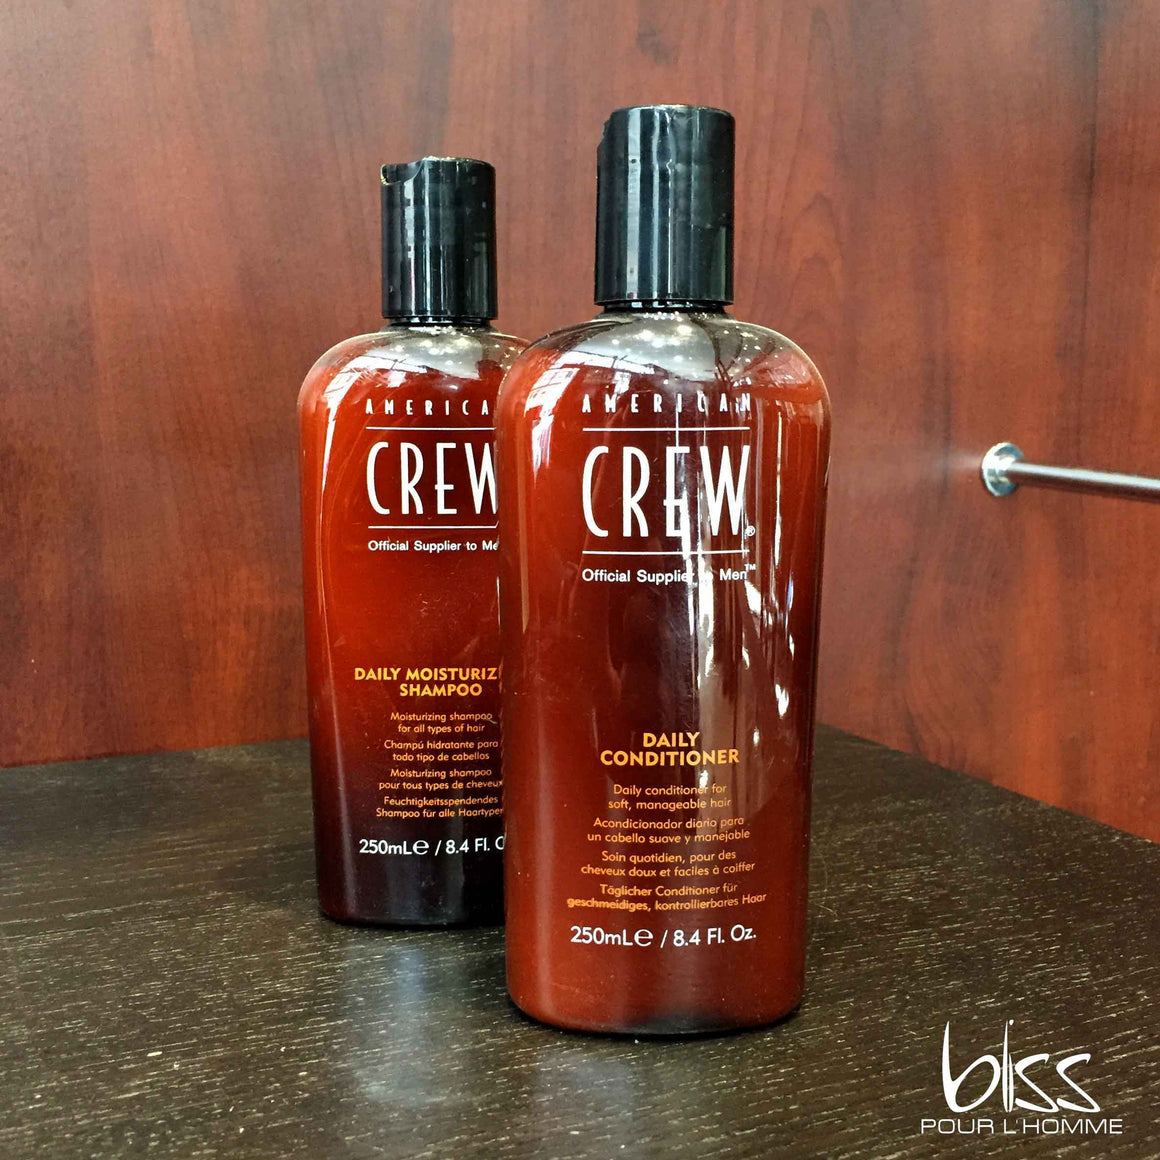 American Crew - Pack "Drive Her Wild" - Daily moisturizing Shampoo & Conditionner